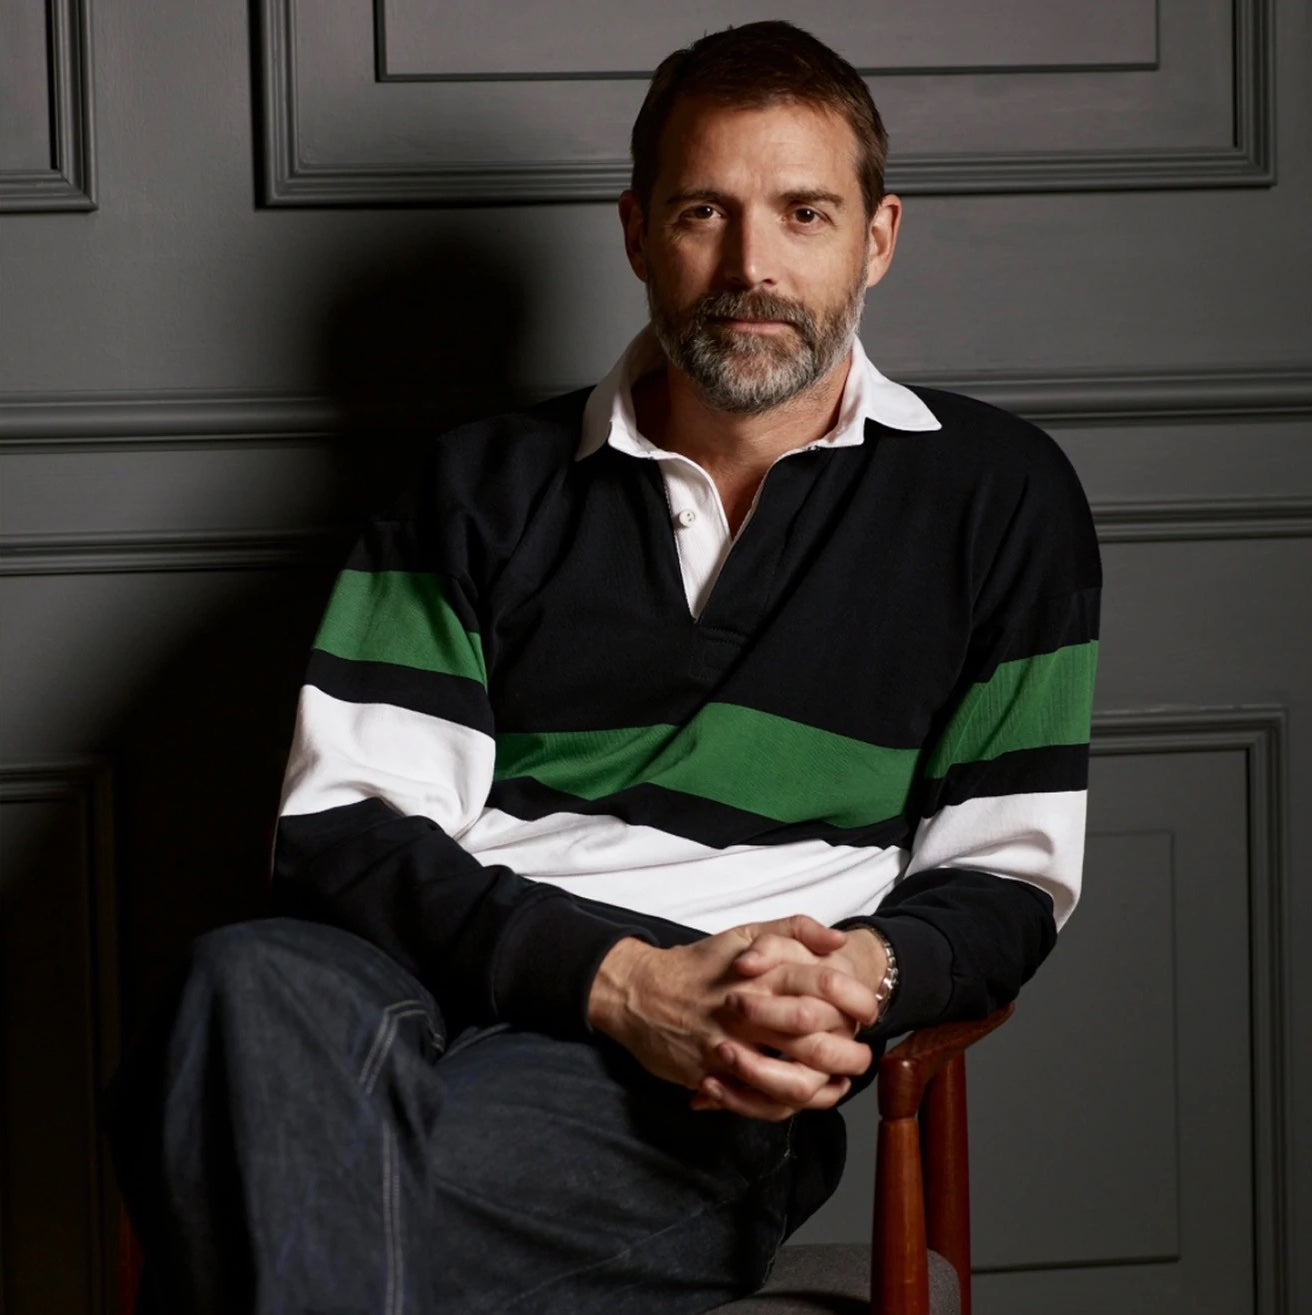 A LETTER FROM PATRICK GRANT, FOUNDER OF COMMUNITY CLOTHING